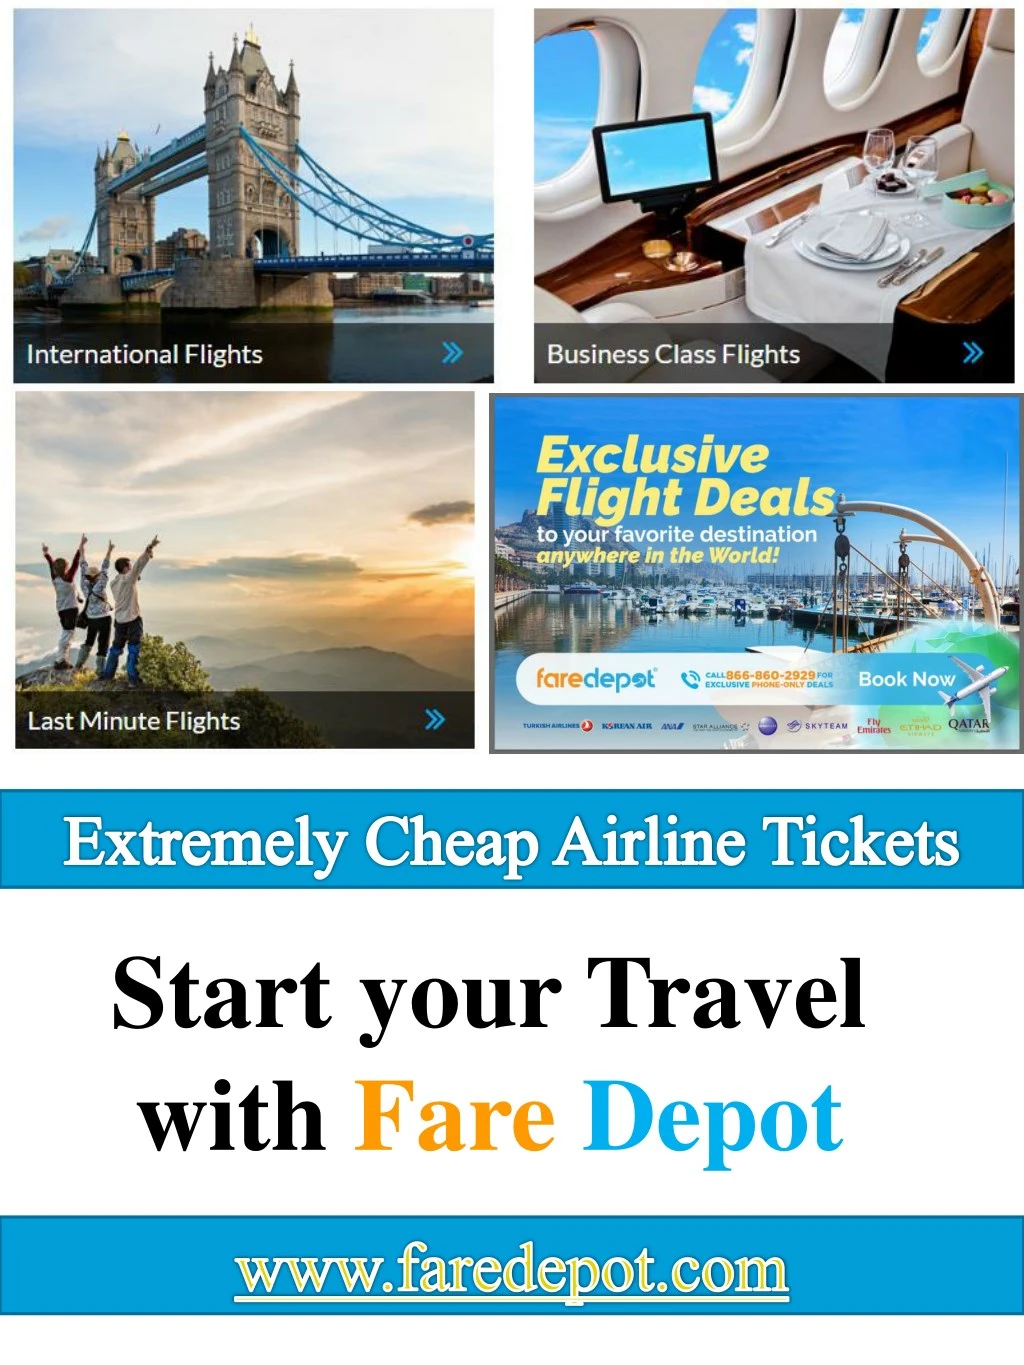 start your travel with fare depot